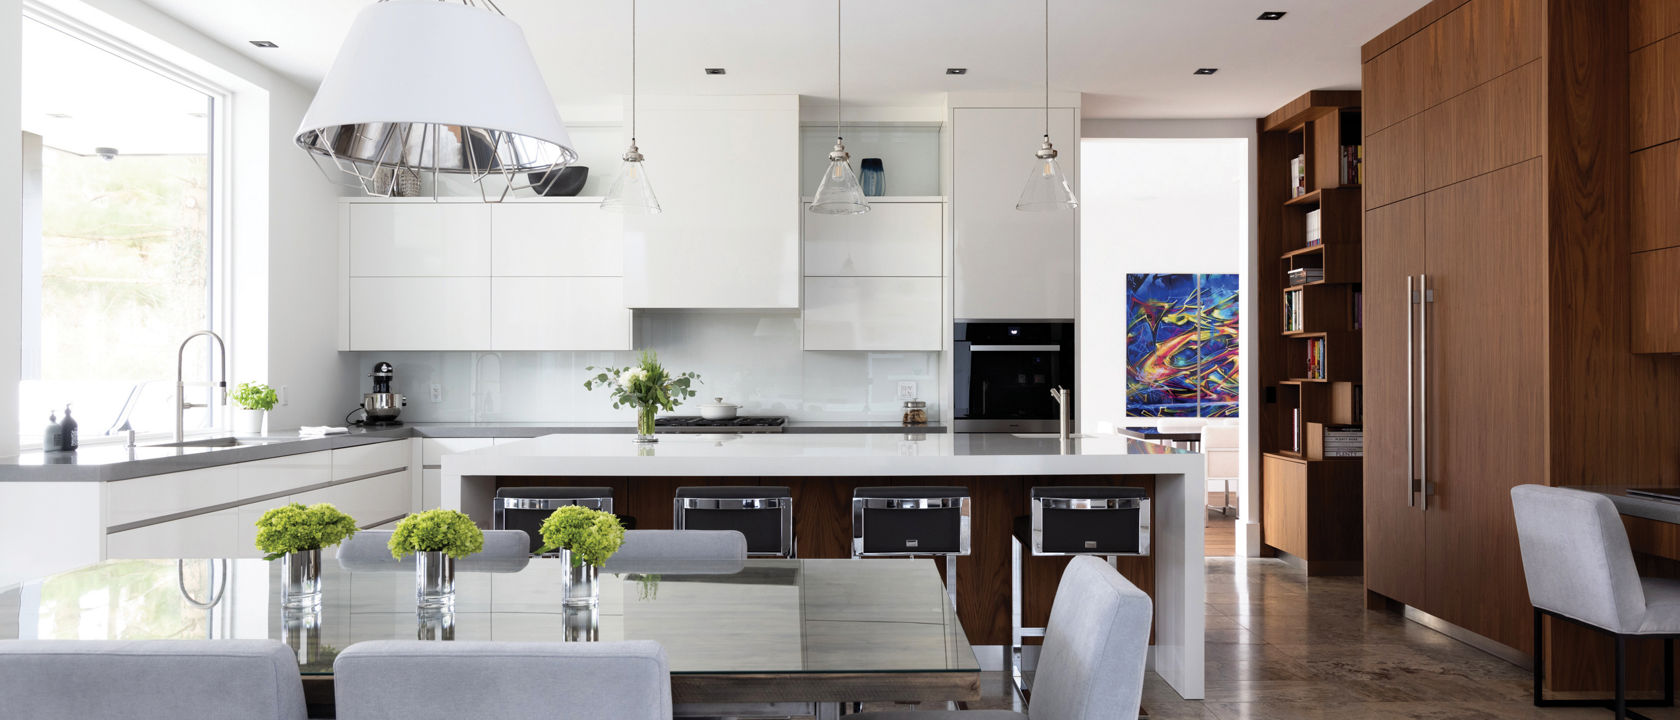 a contemporary kitchen with white and wooden cabinets, white quartz countertops, and tiled flooring.